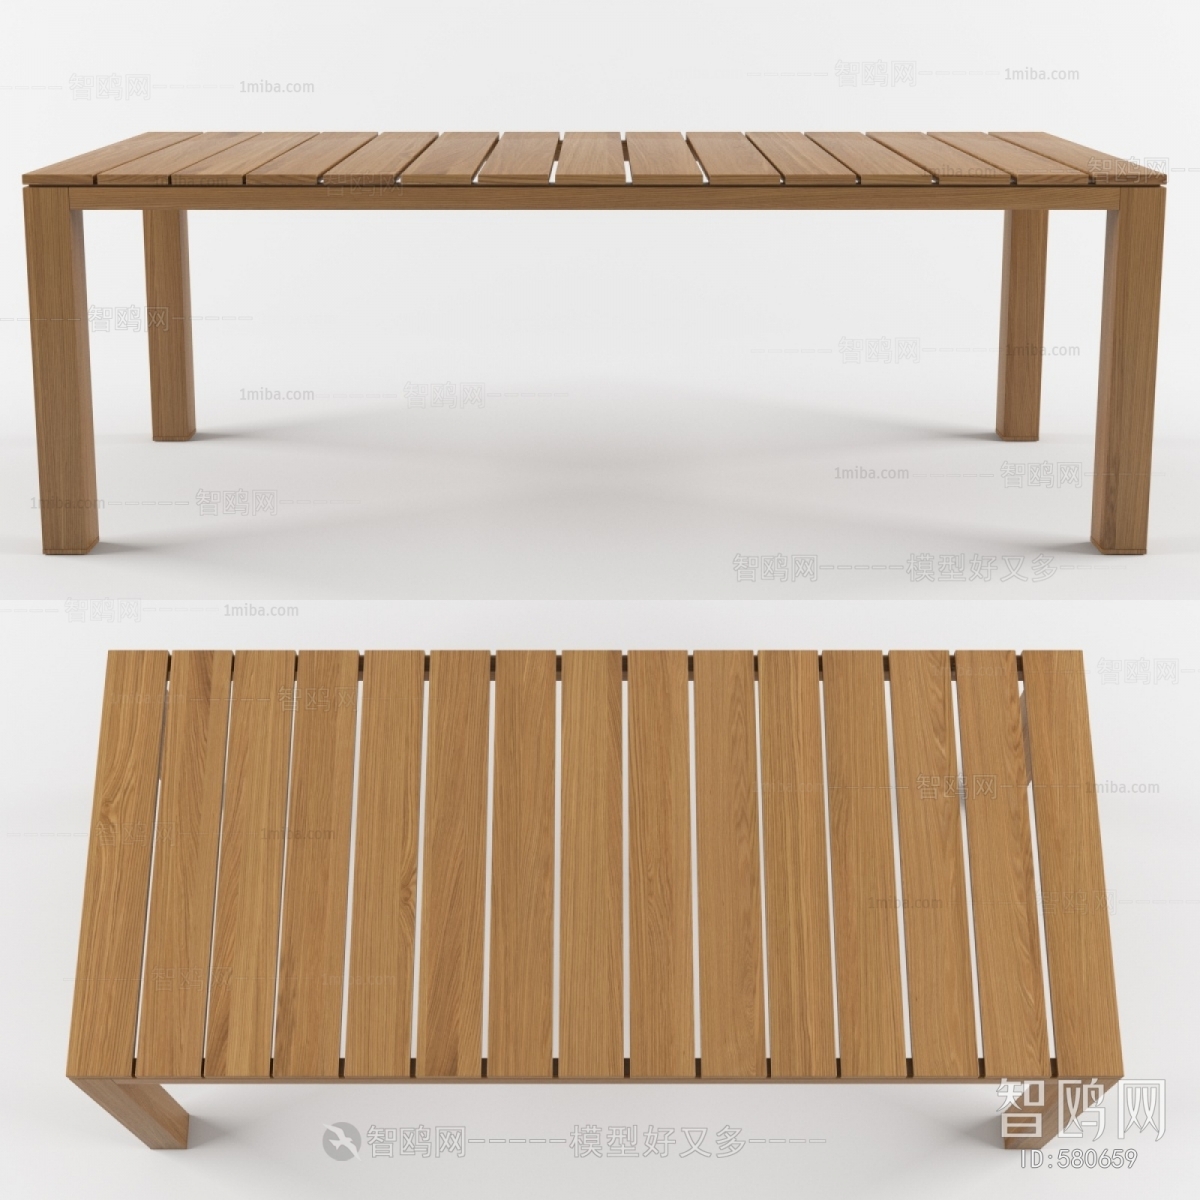 Modern Wooden Bench Or Stool